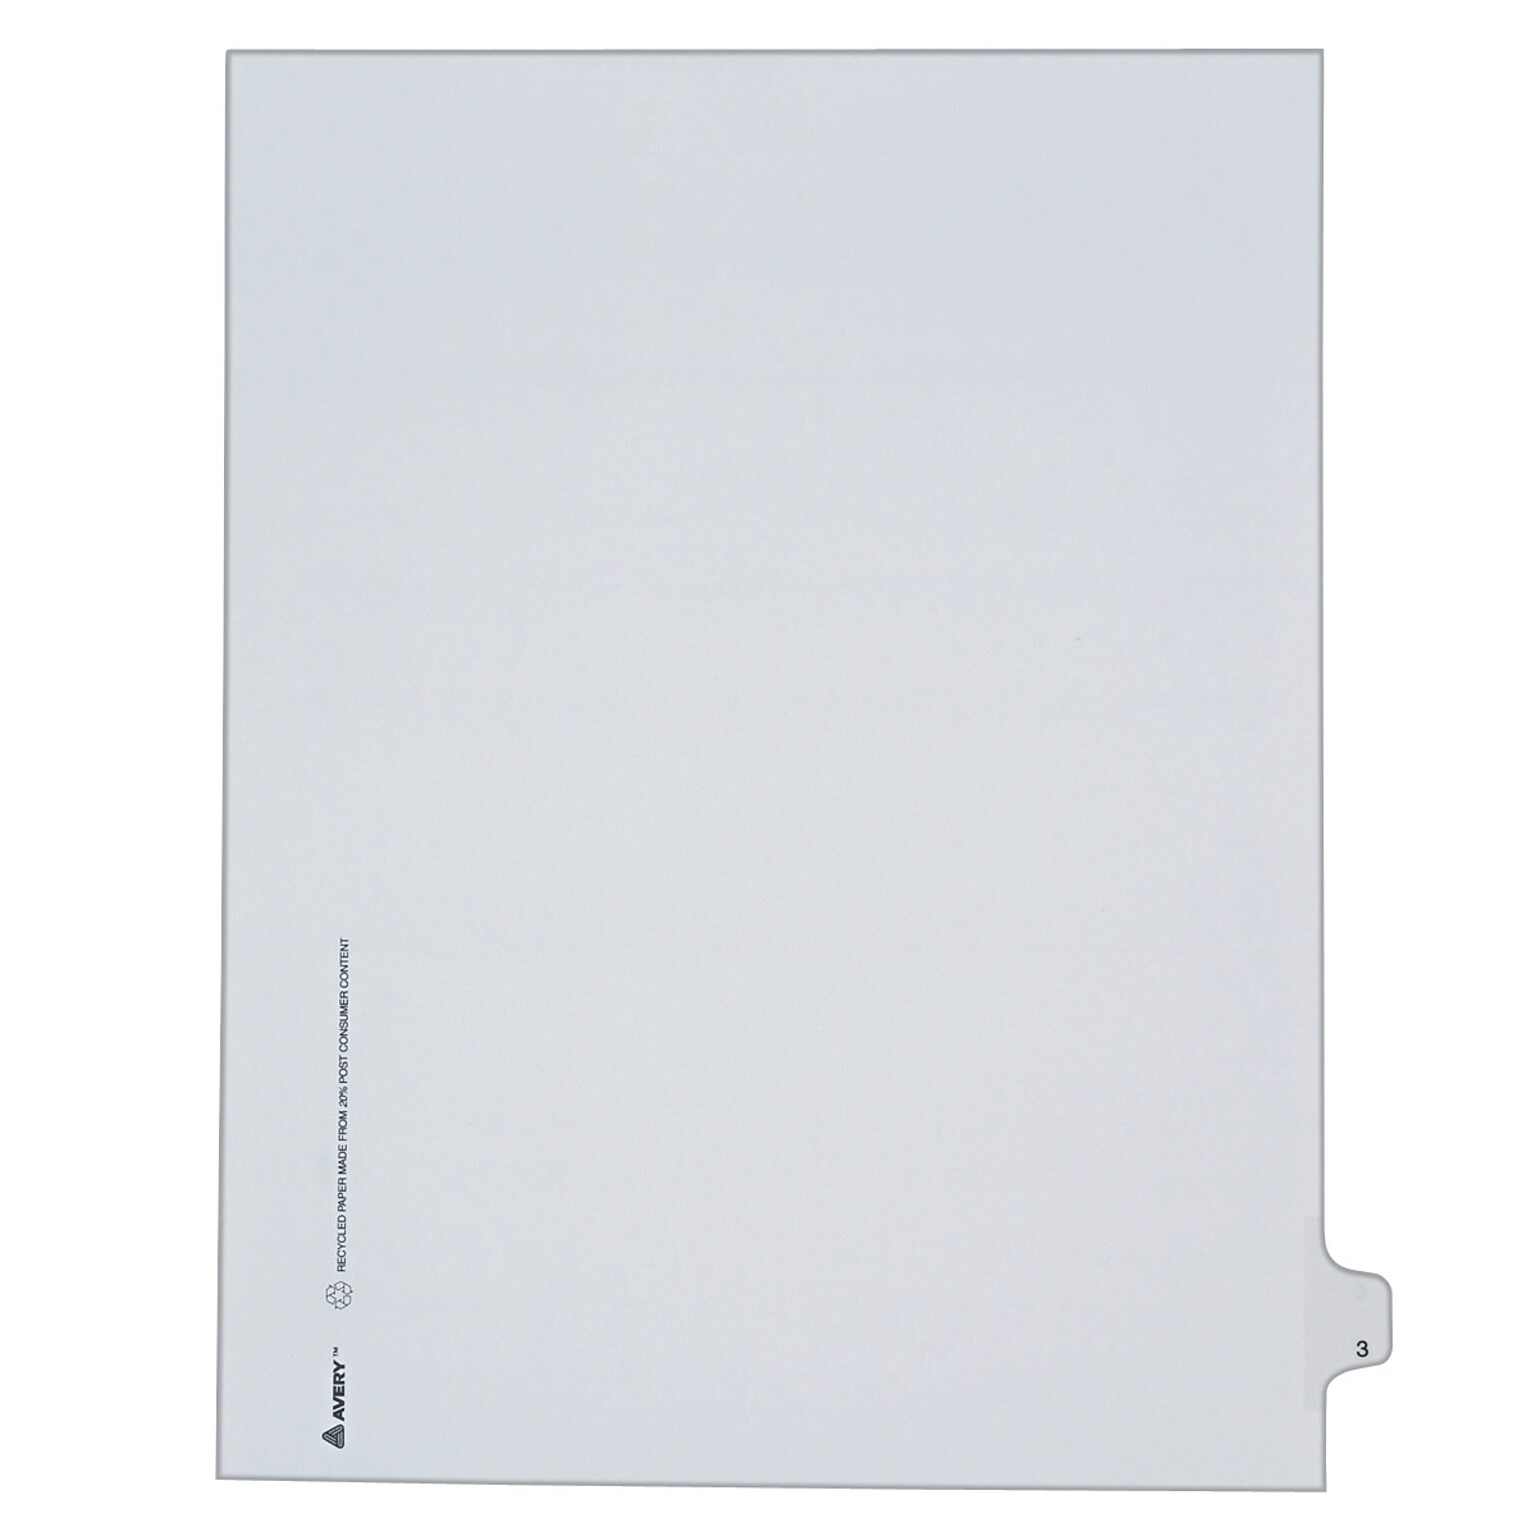 Avery Legal Pre-Printed Paper Dividers, Side Tab #3, White, Allstate Style, Letter Size, 25/Pack (82201)